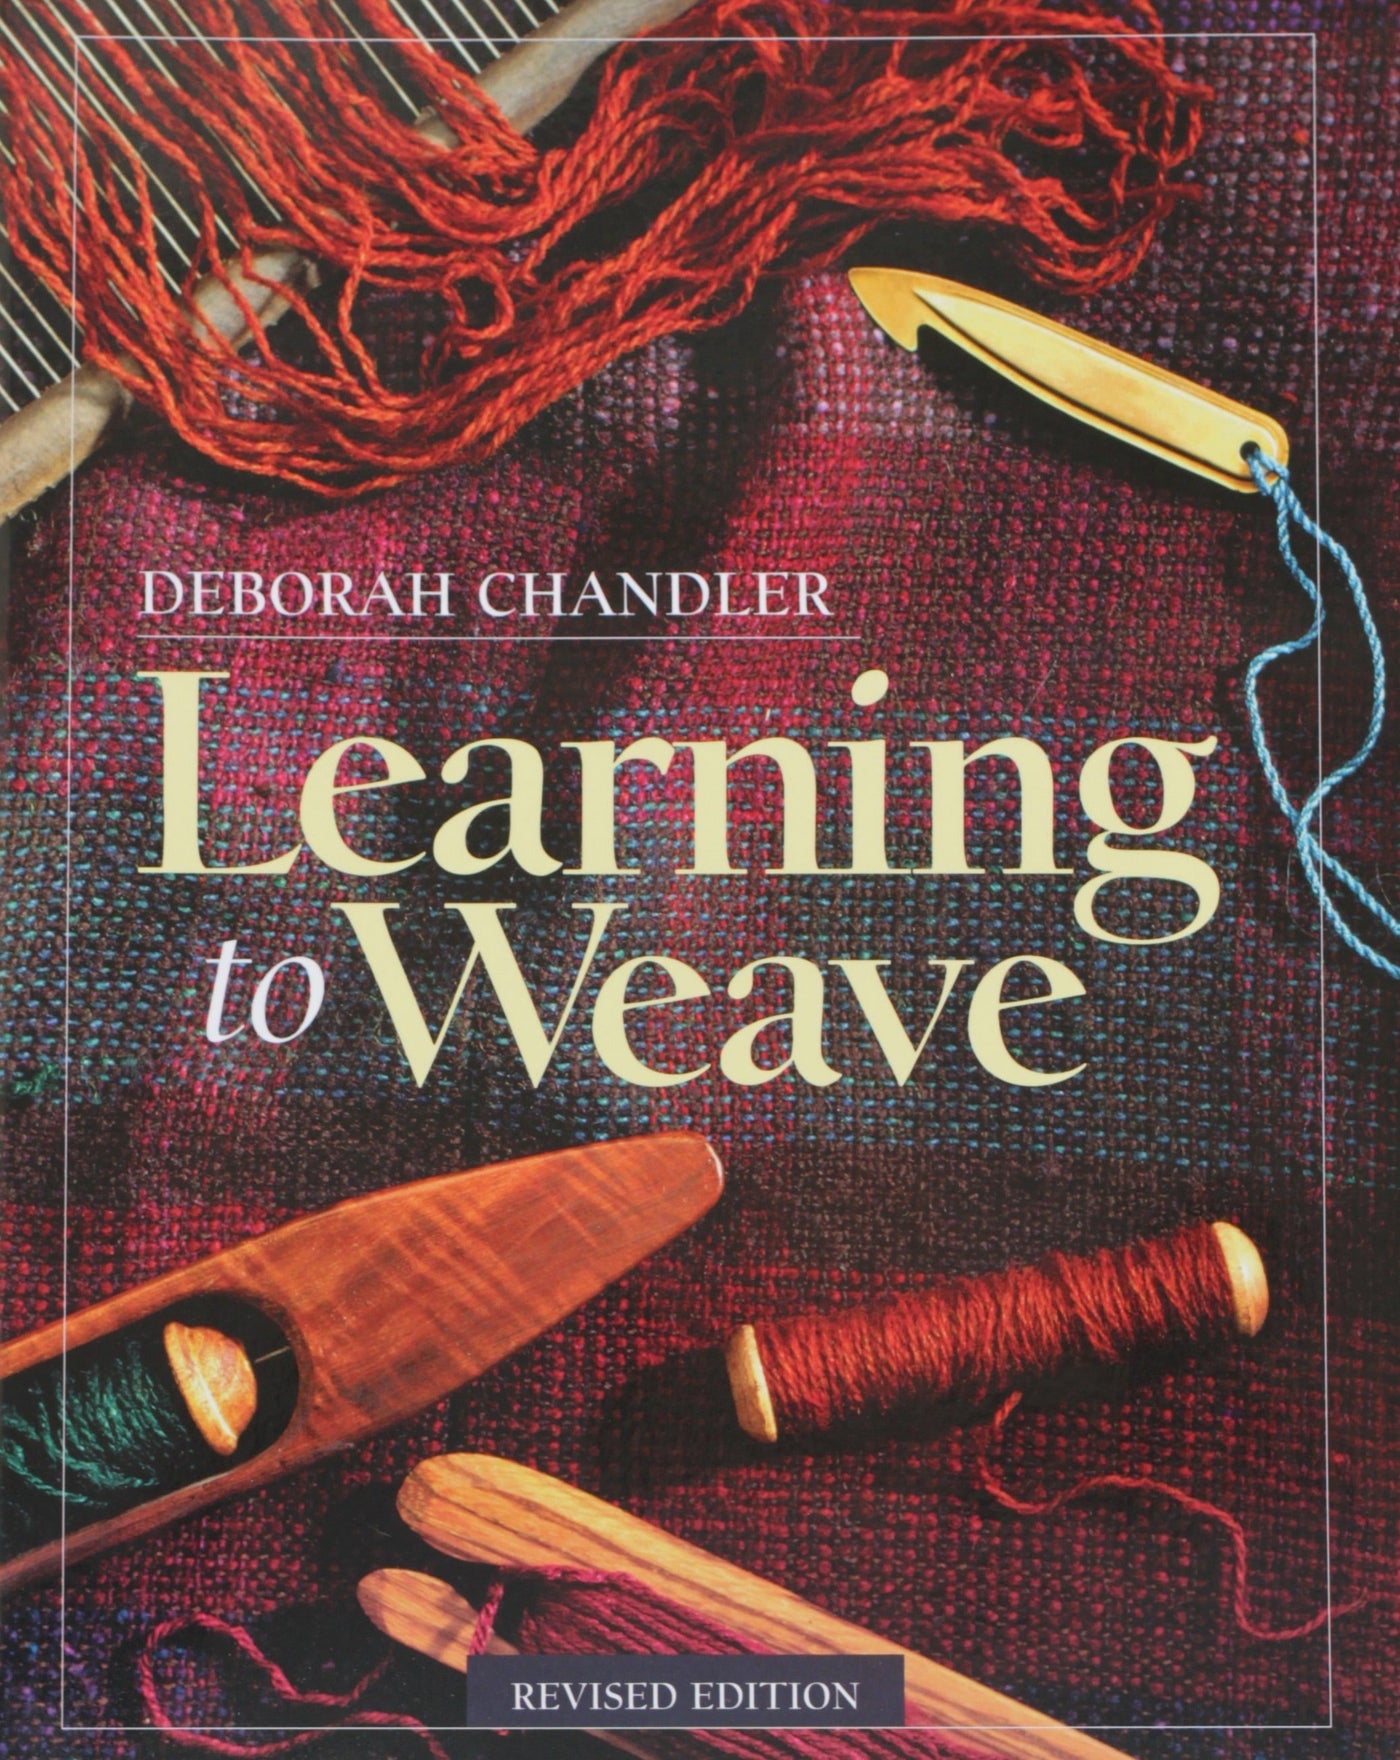 How to weave book